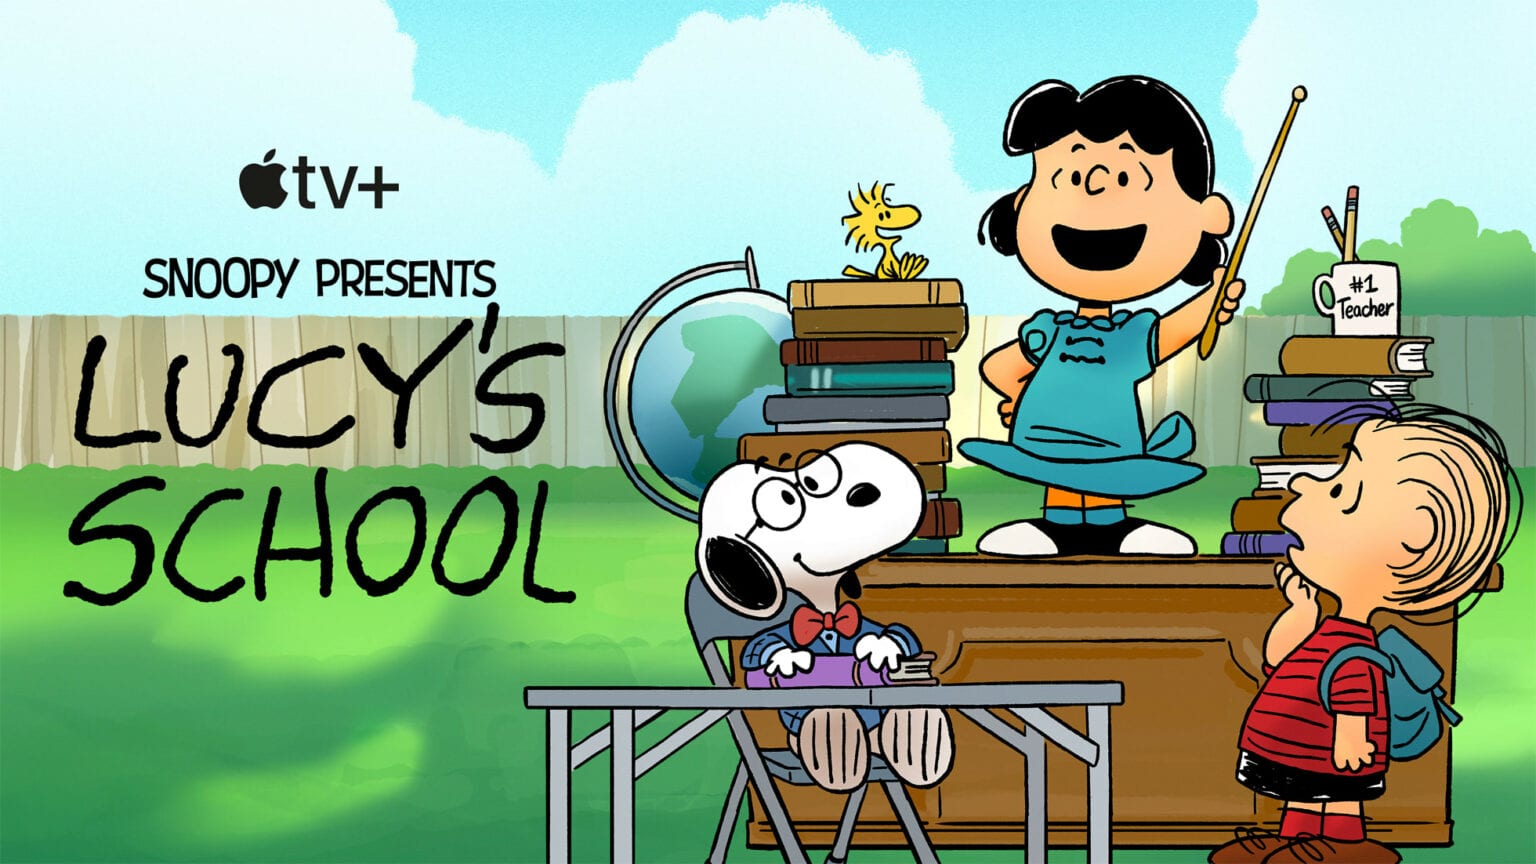 It's a back-to-school special, Charlie Brown!